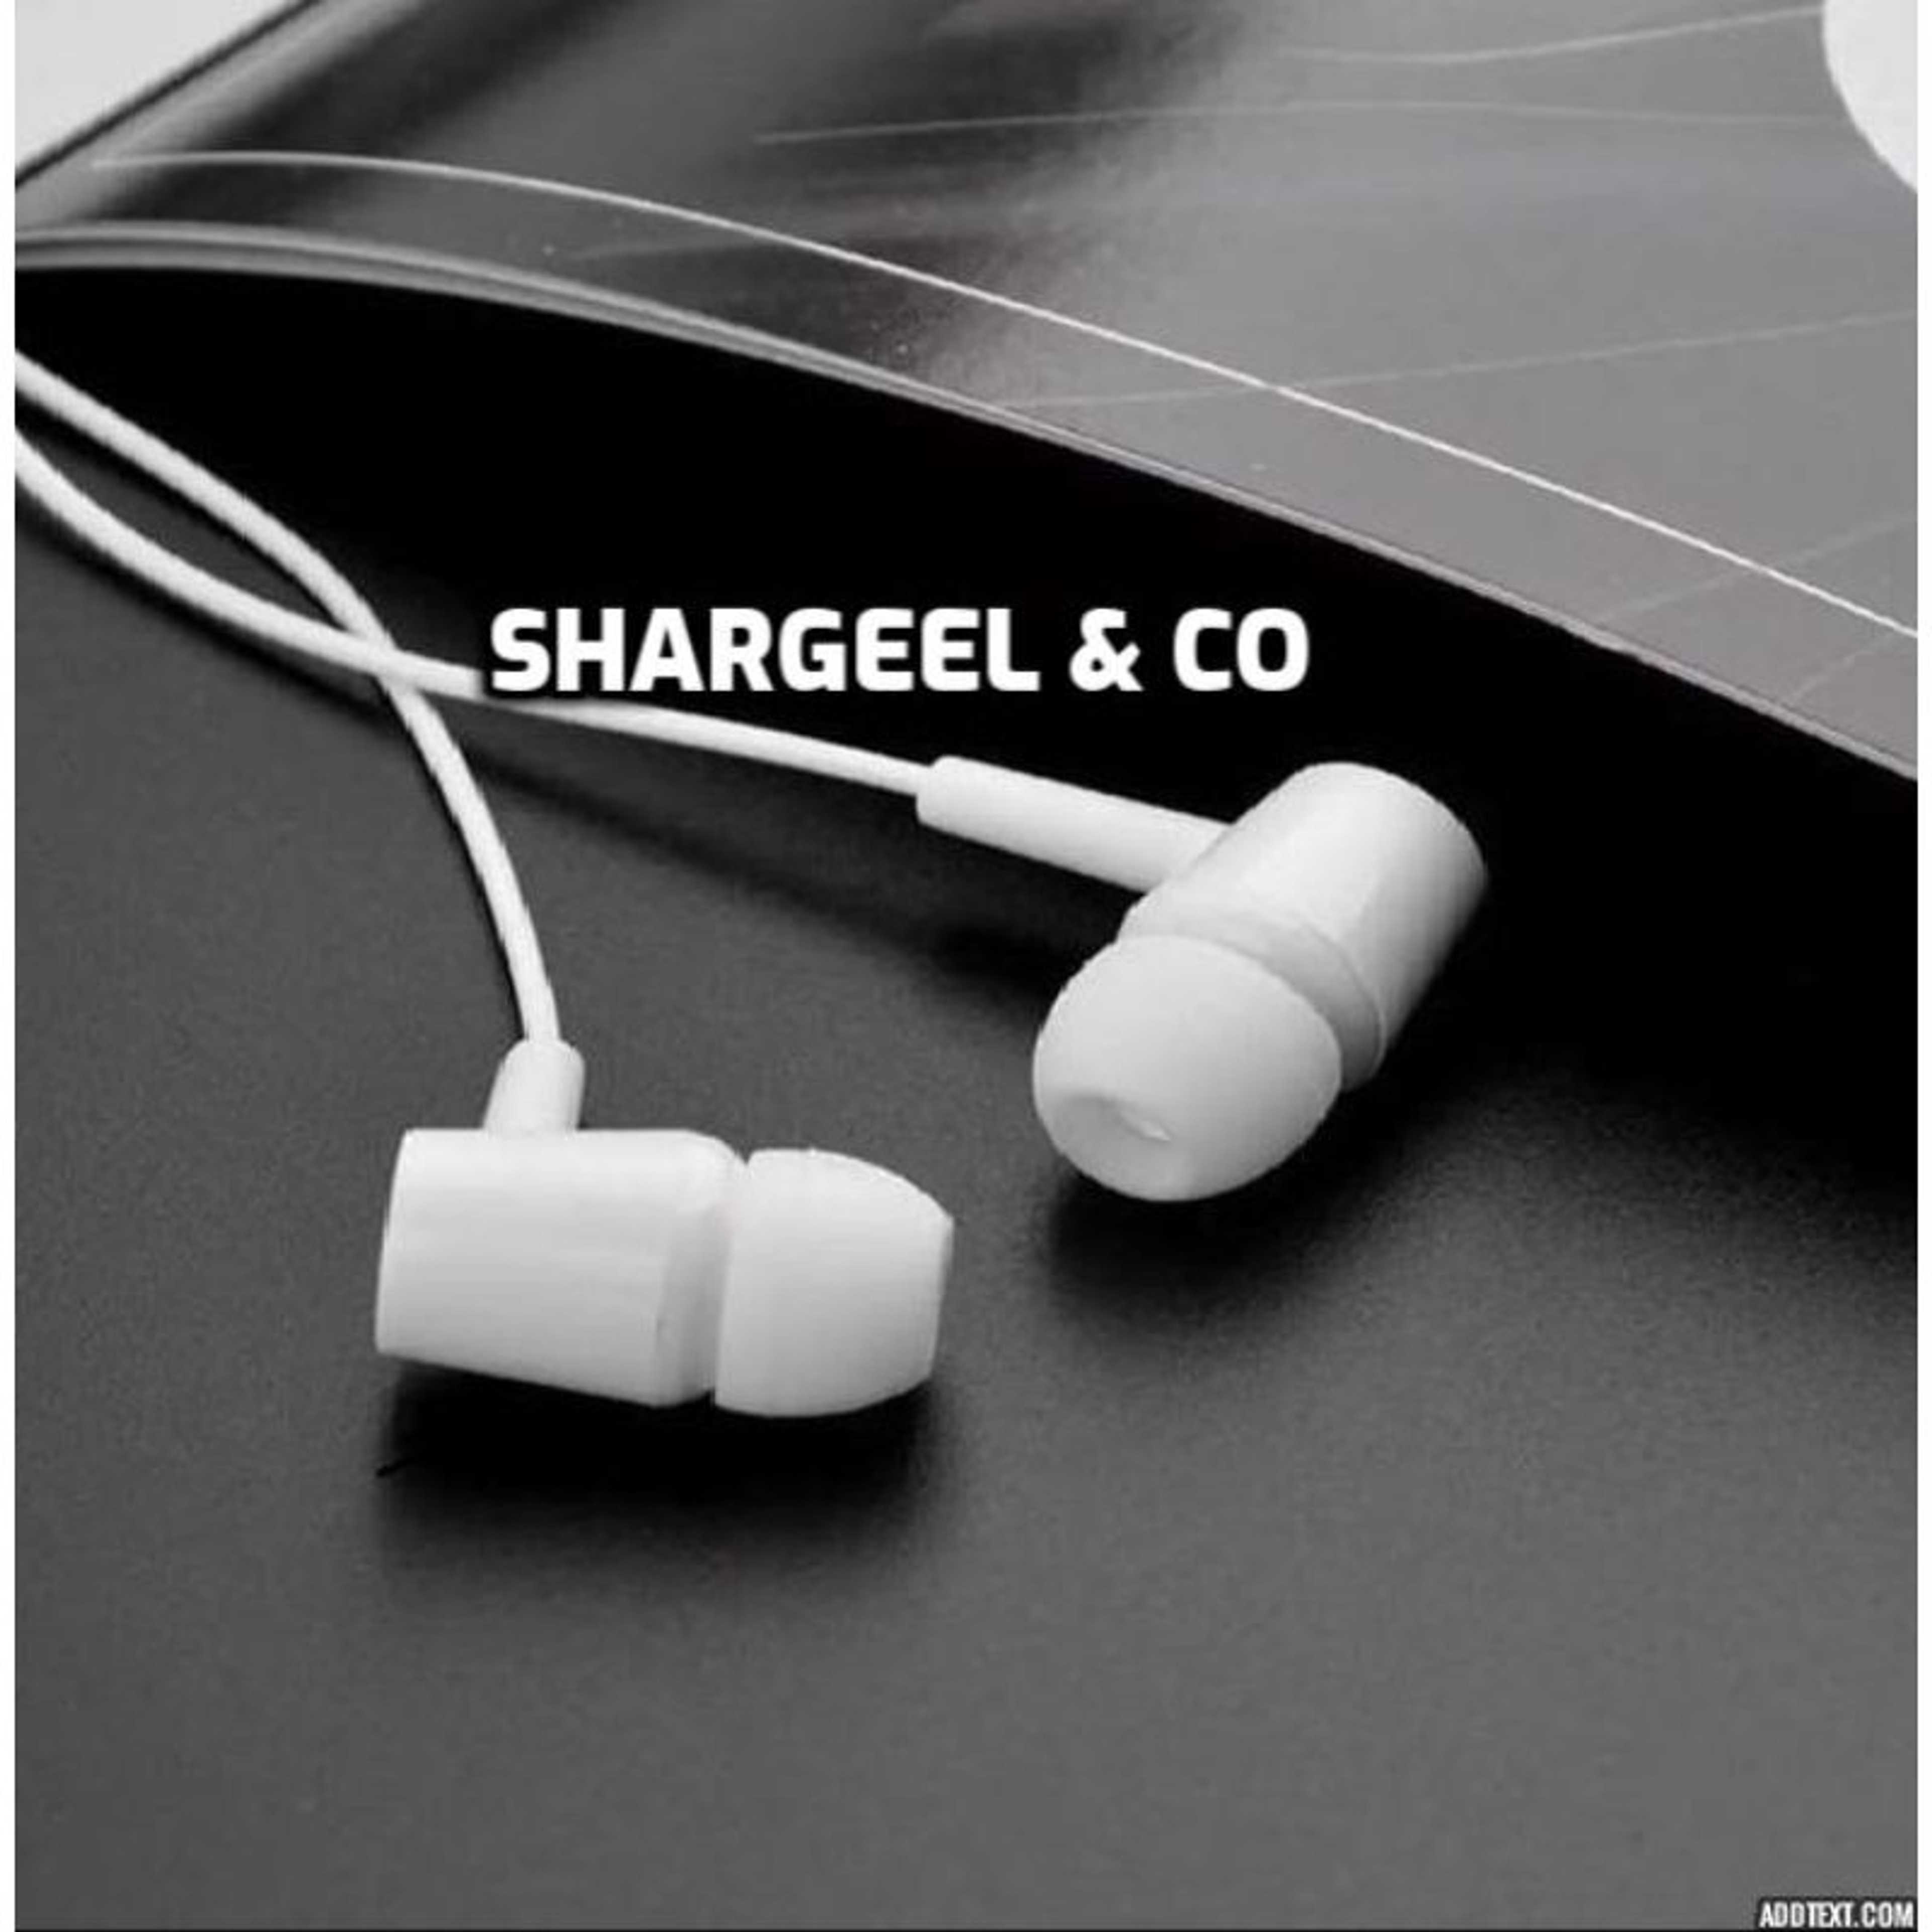 Shargeel & Co Hands-free 100% Genuine Universal Handsfree white color Imported/Branded, High Quality Deep stereo Bass/Sound Earphones Headphones Handfree 3.5 meter length (light weight) original headset specially designed for android and apple mobiles